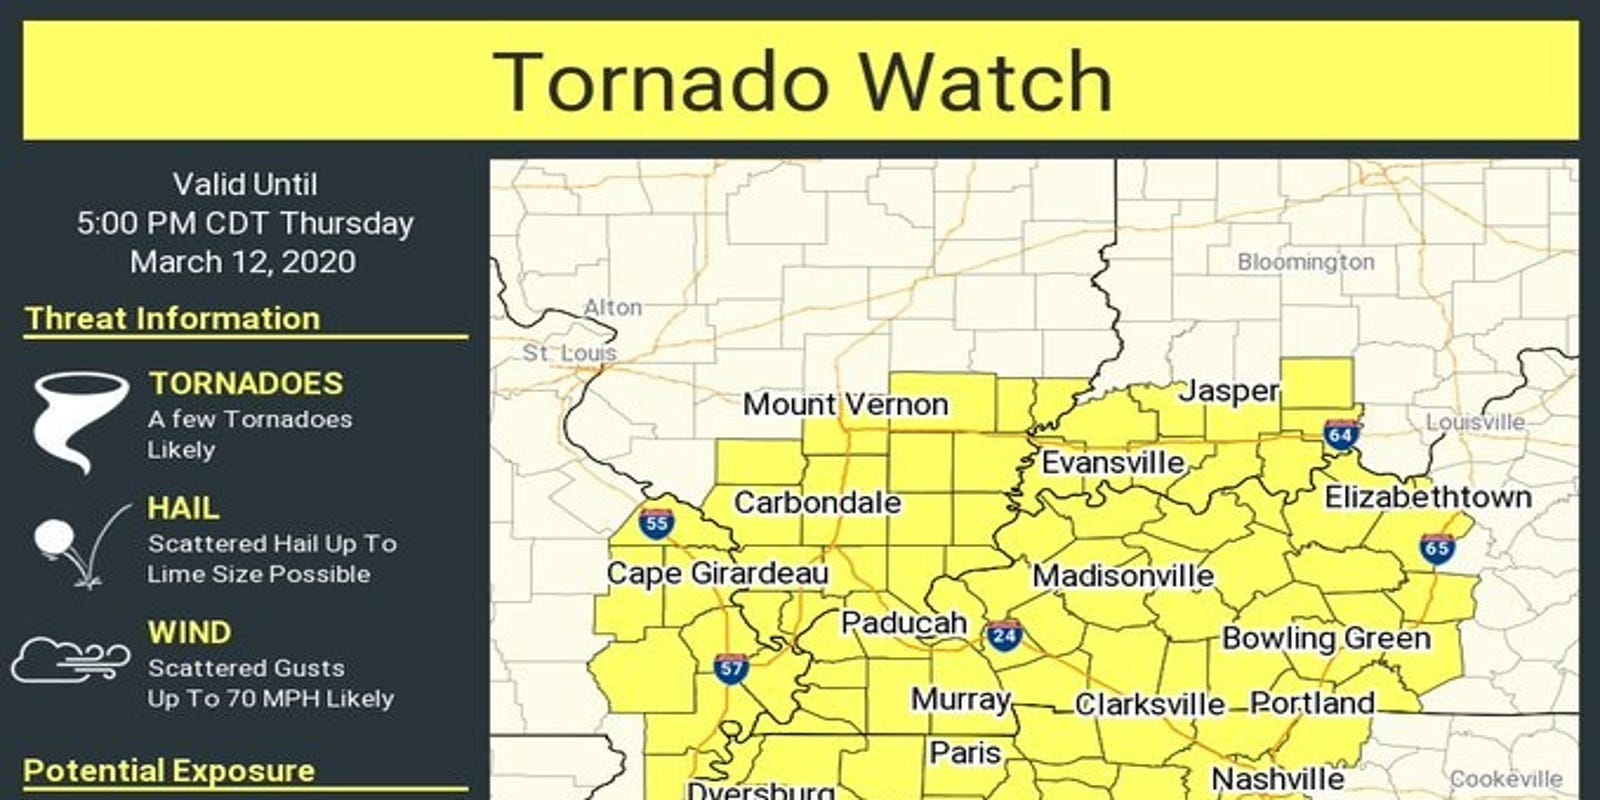 Nashville forecast Tornado watch issued for part of Middle Tennessee